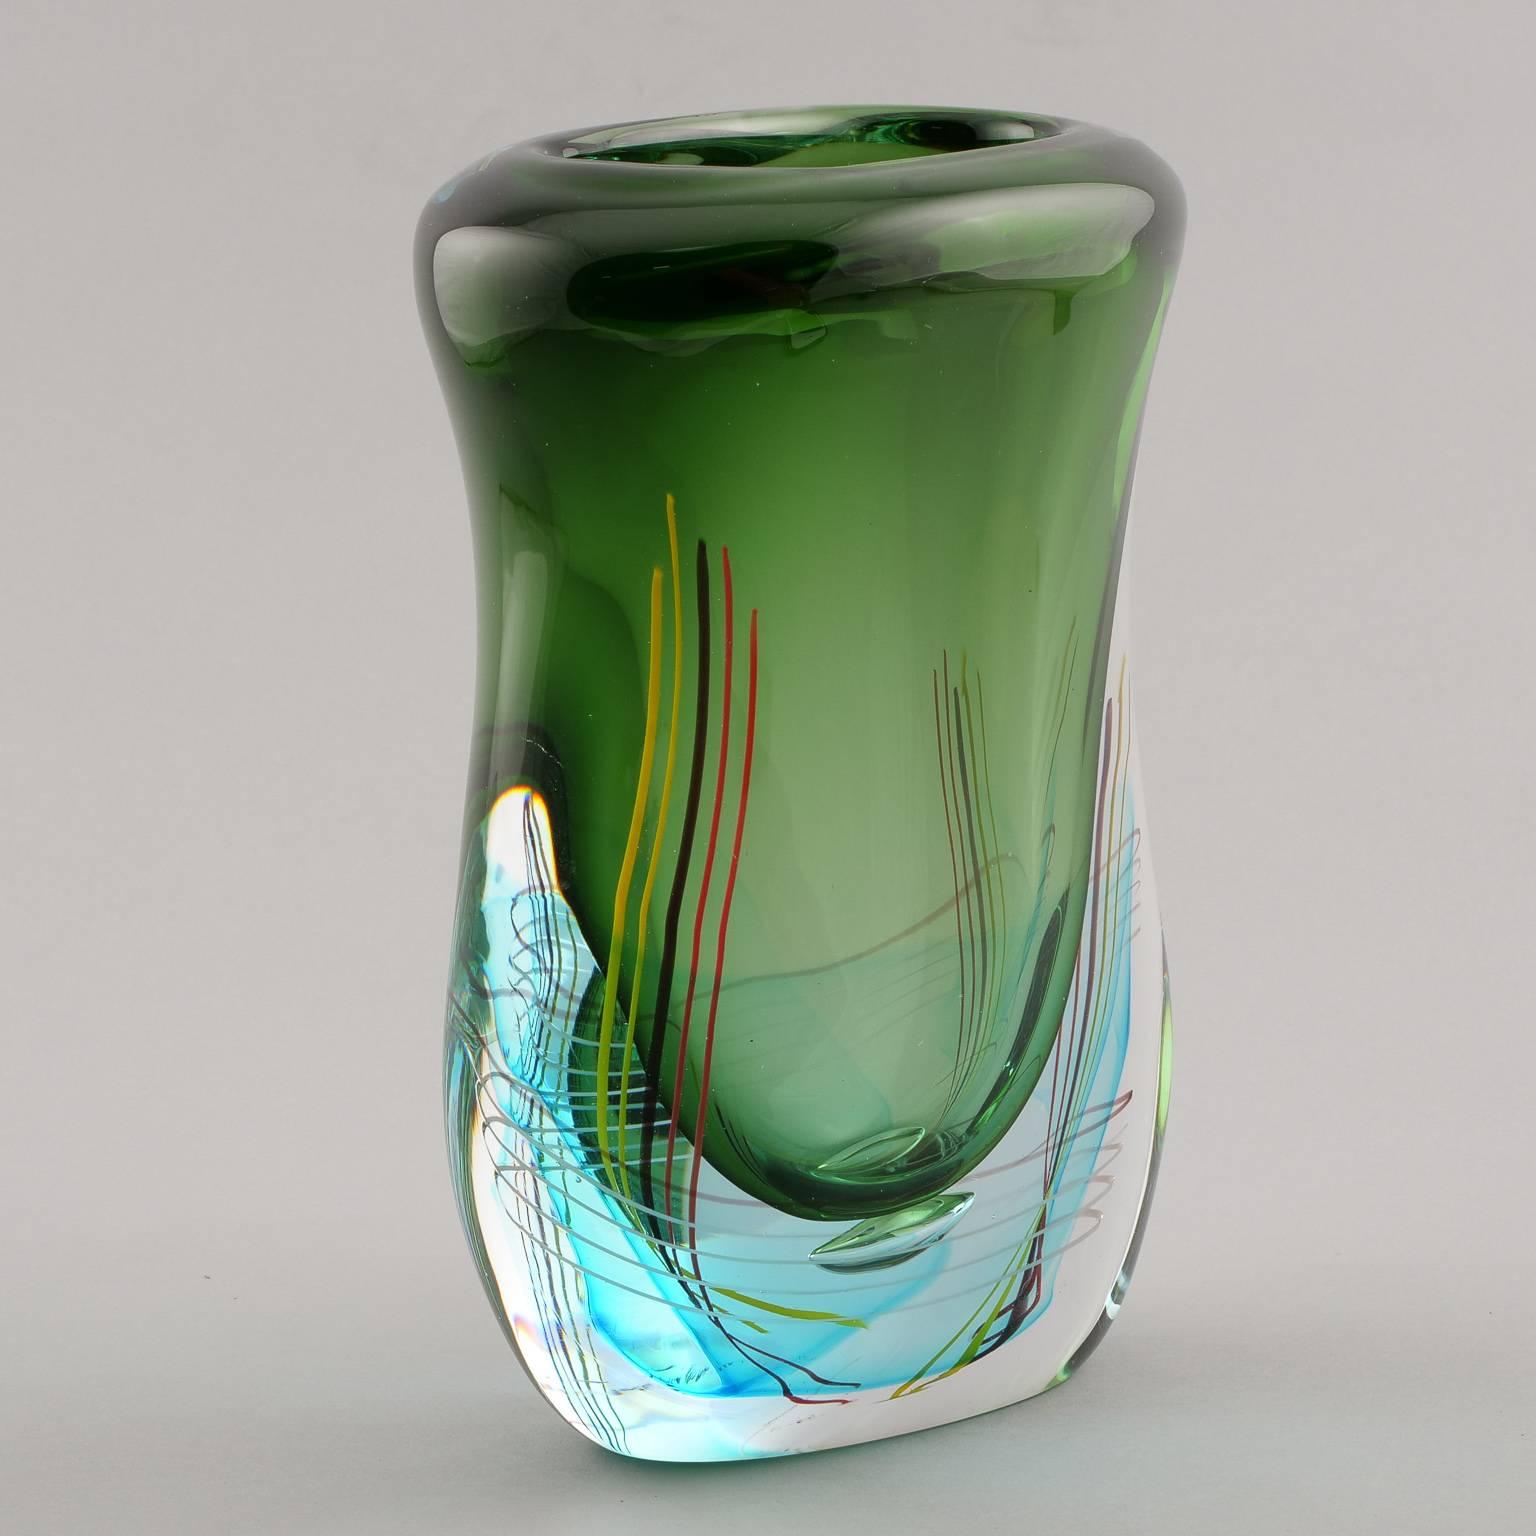 Contemporary Murano art glass vase by Fratelli Toso features a spring green vessel with thick clear glass cased base accented with blue and multicolor streaks.